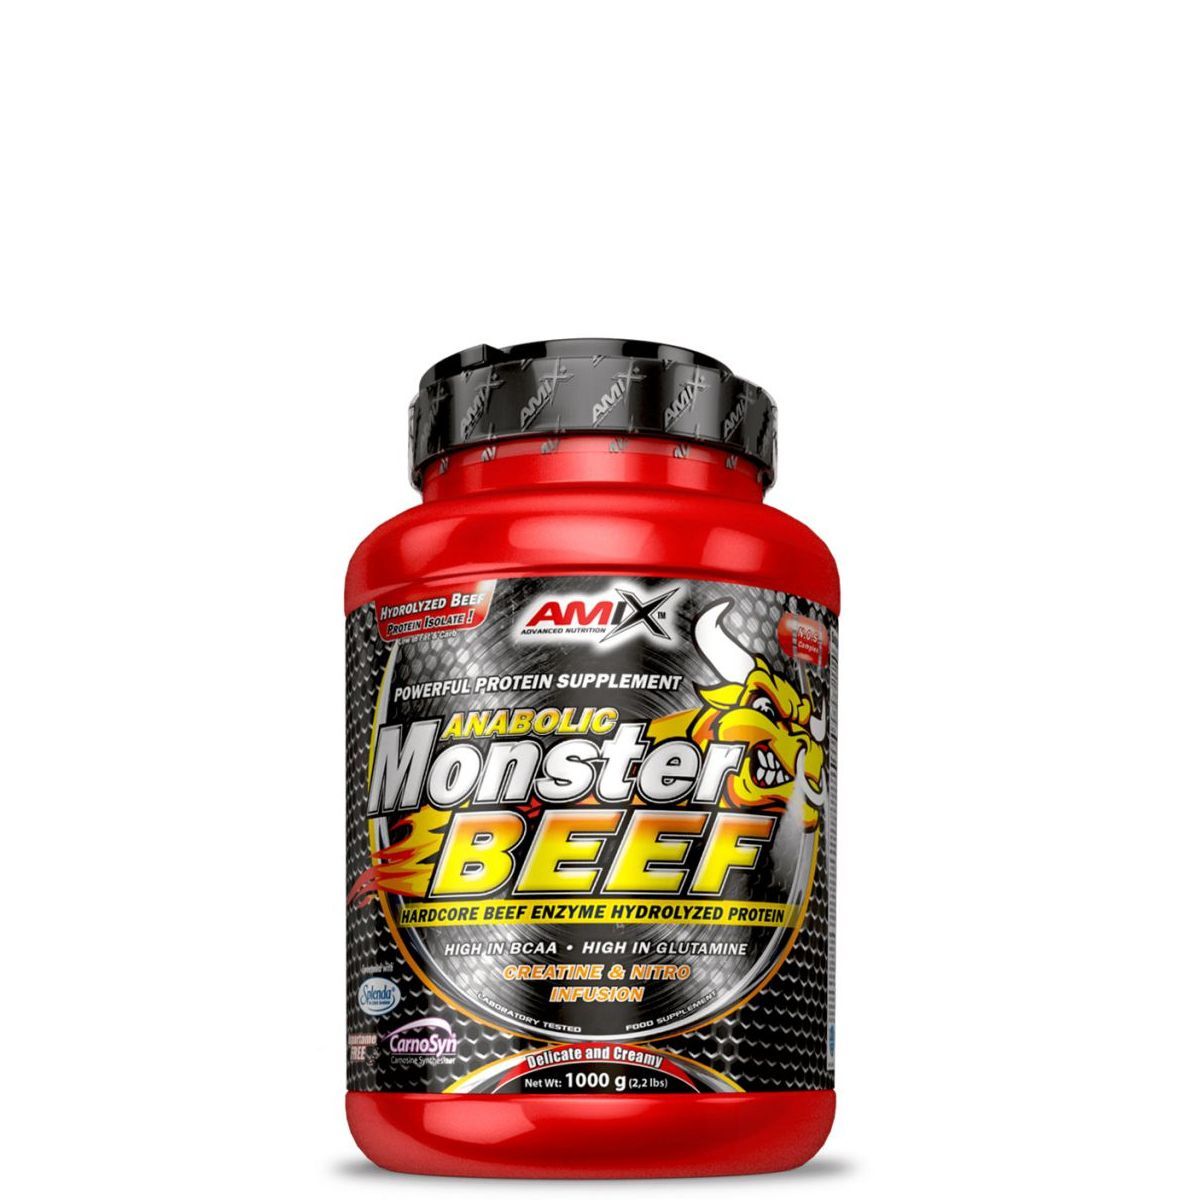 Amix- Anabolic Monster Beef - Hardcore Beef Enzyme Hydrolyzed Protein - 1000g